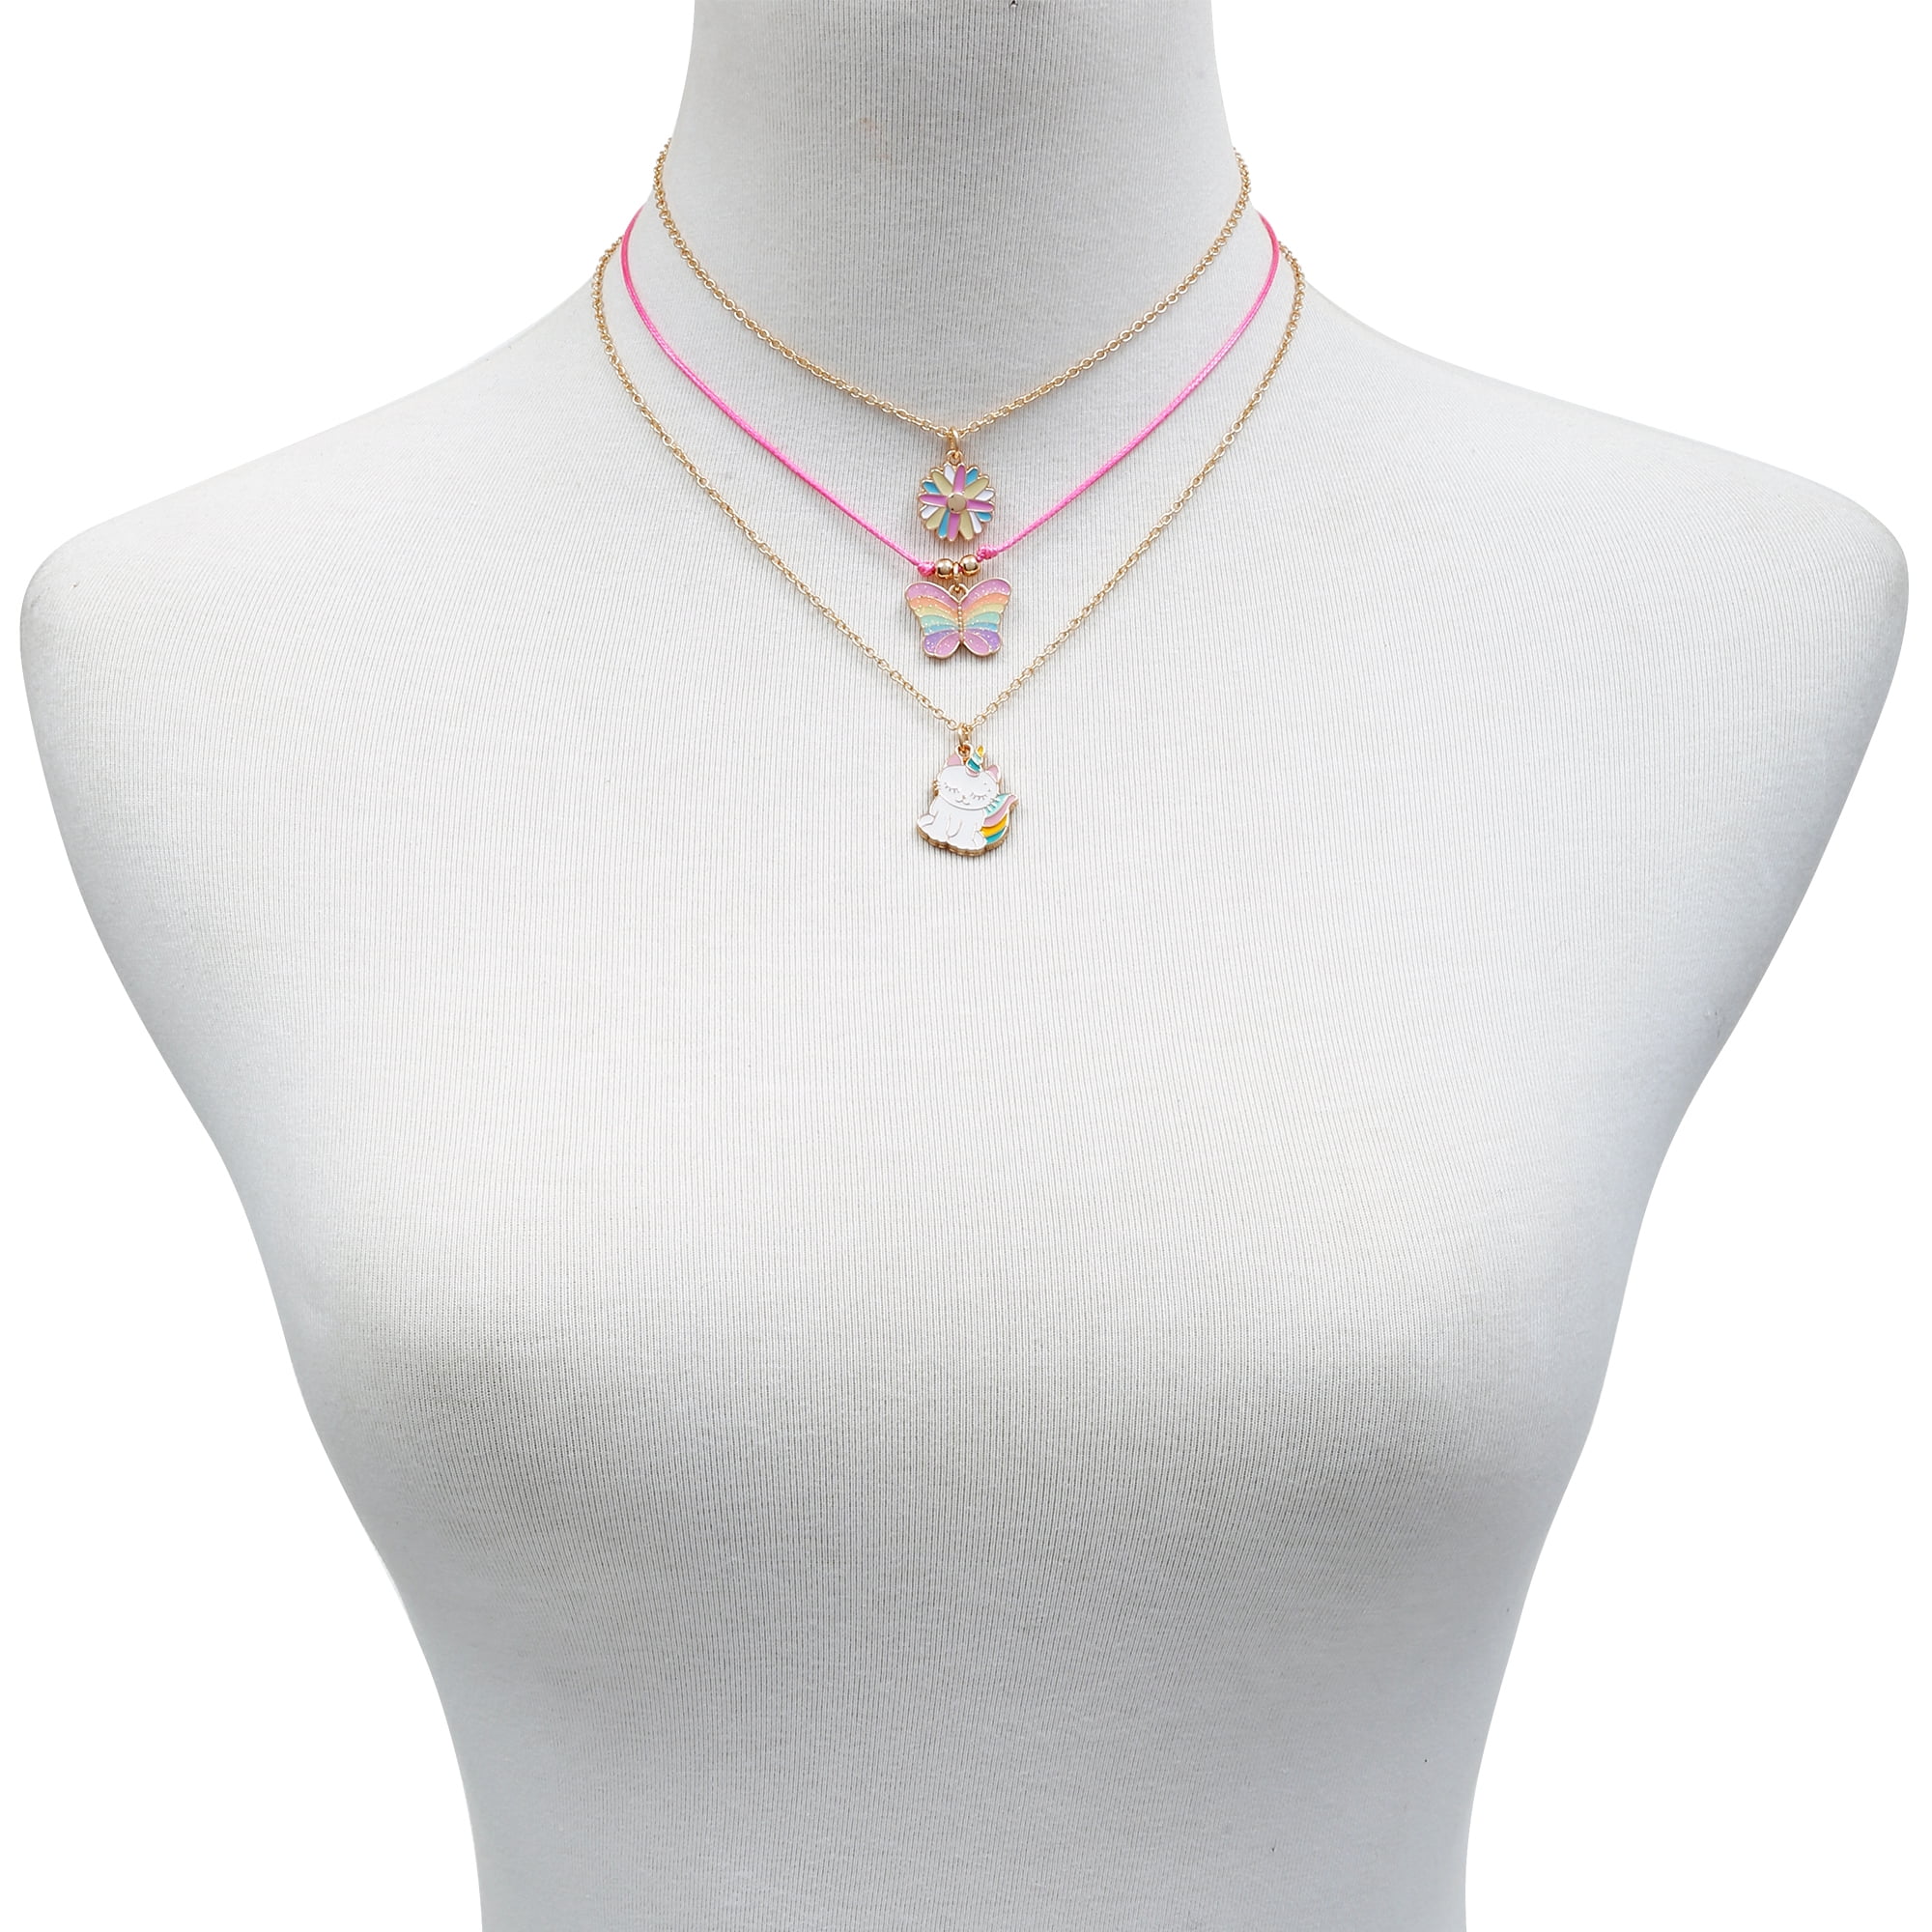 Wonder Nation Girls Trio Necklace set. Caticorn, Butterfly, and Flower Charms in Multi Pastel Colors. 14", 15", 16"